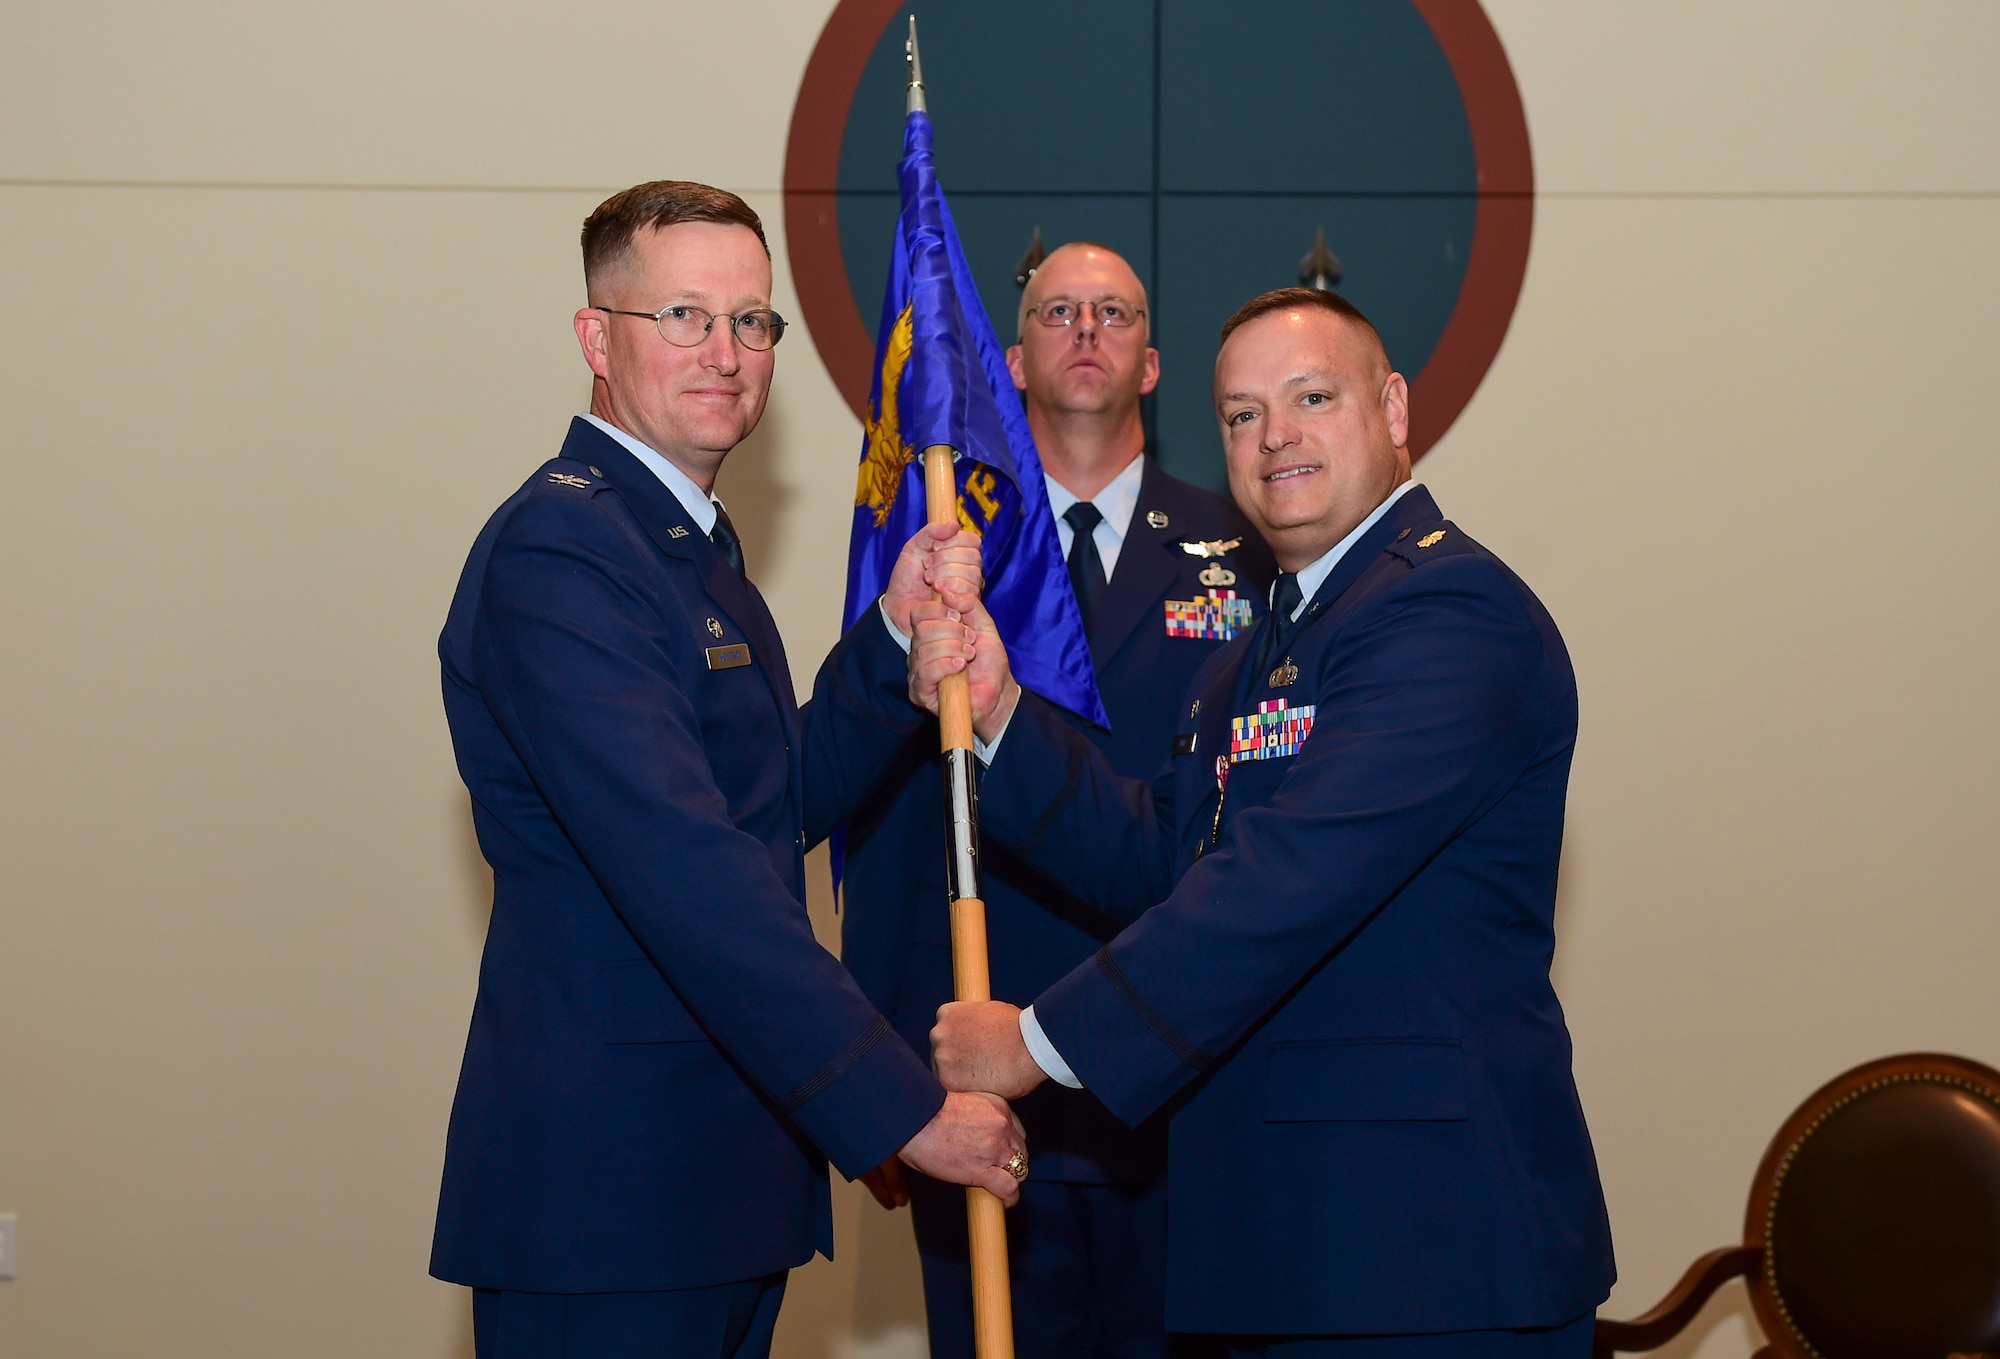 Maj. Gene Smith, 460th Contracting Flight outgoing commander, relinquishes the guidon to Col. Shawn Thompson, 460th Mission Support Group commander, June 28, 2017, on Buckley Air Force Base, Colo. The 460th CONF supports the base with millions of dollars in contracts each year. (U.S. Air Force photo by Airman Jacob Deatherage/Released)